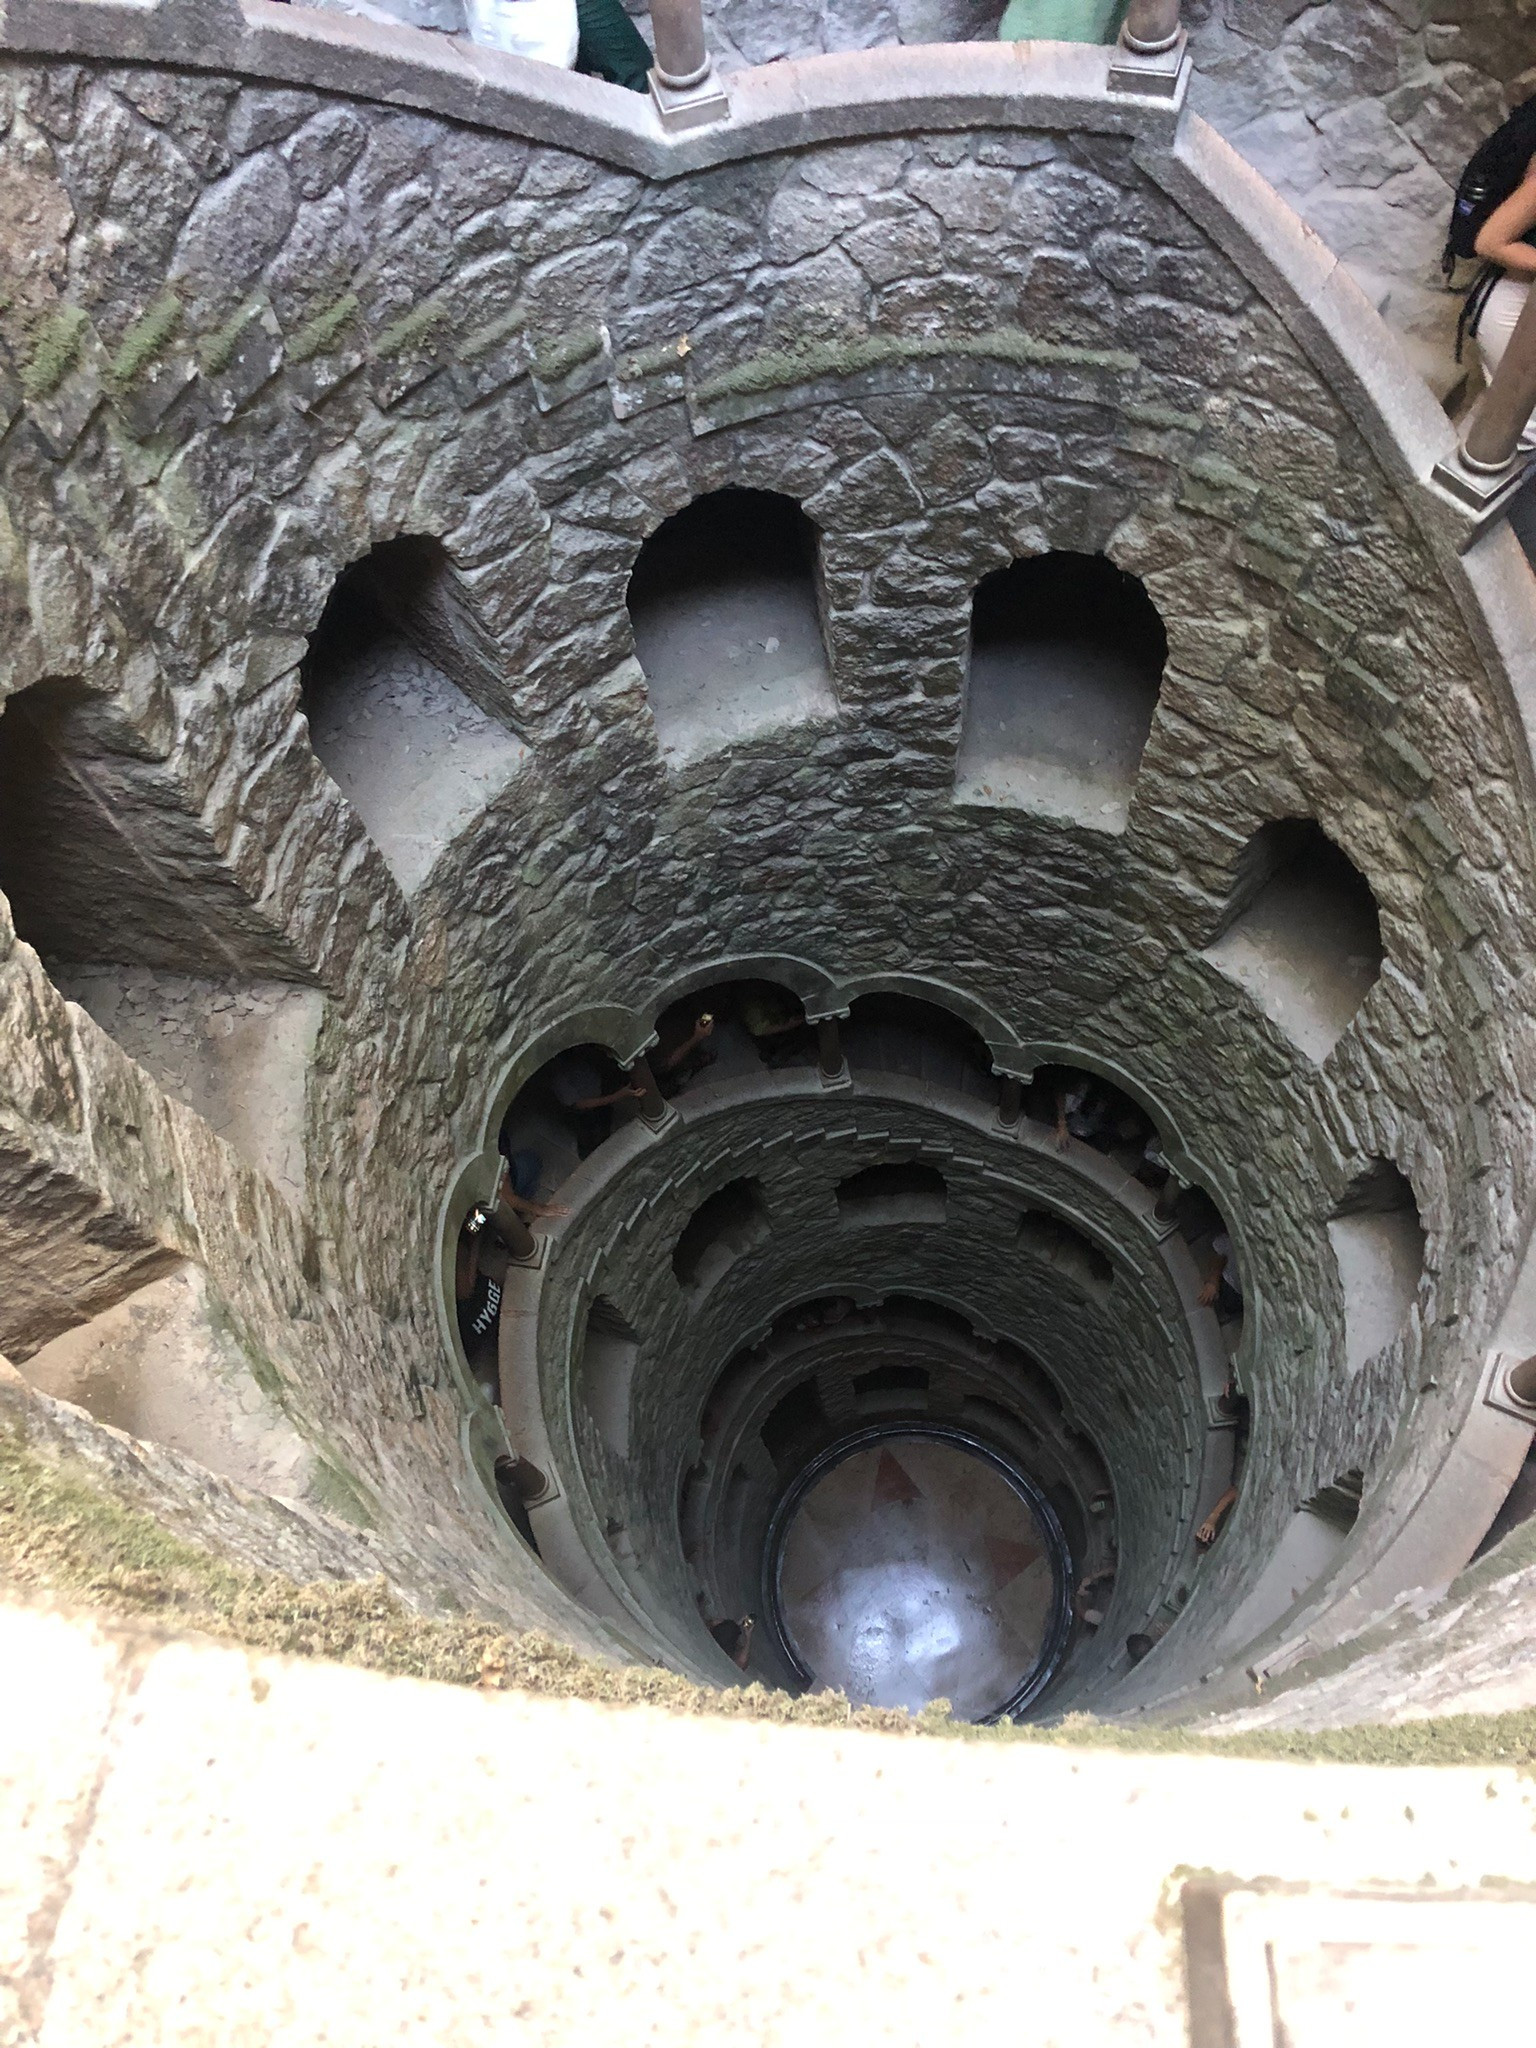 The Initiation Well, Portugal